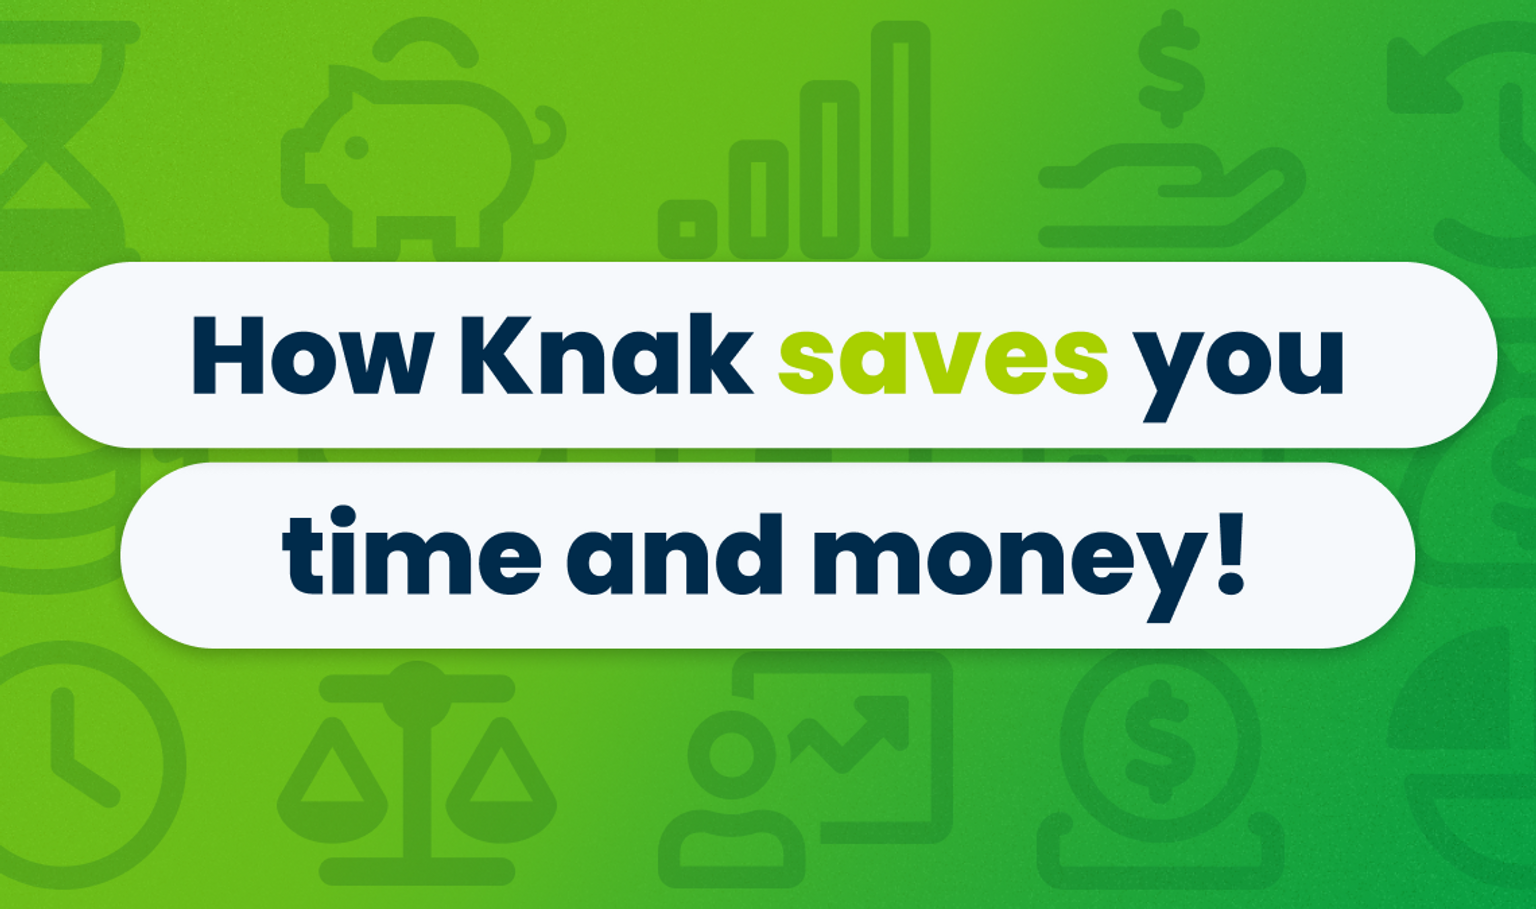 How Knak saves you time and money